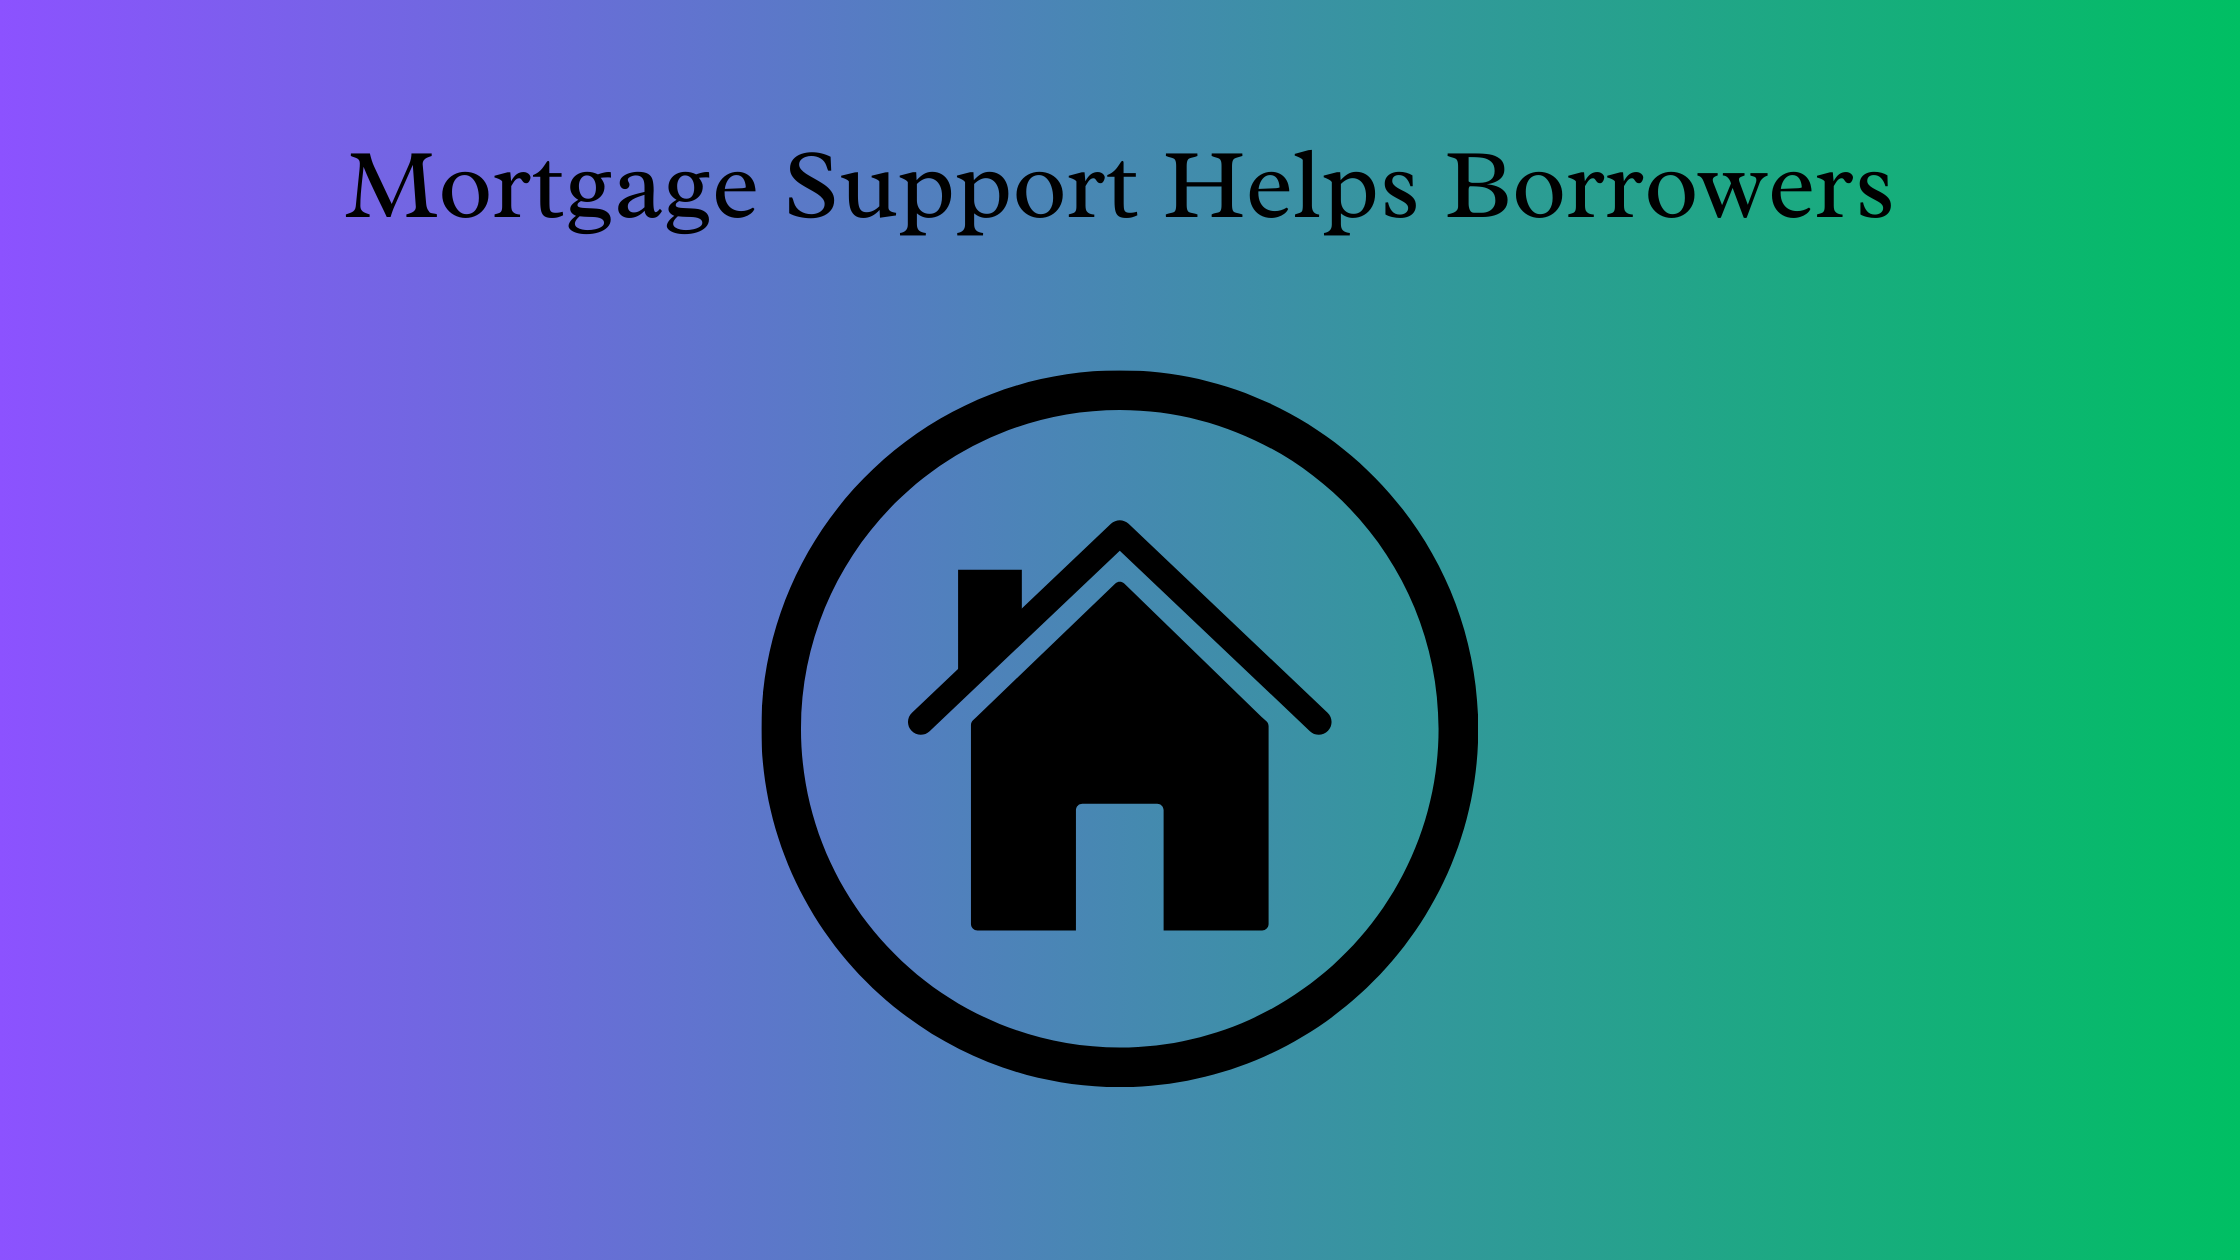 Mortgage support helps borrowers